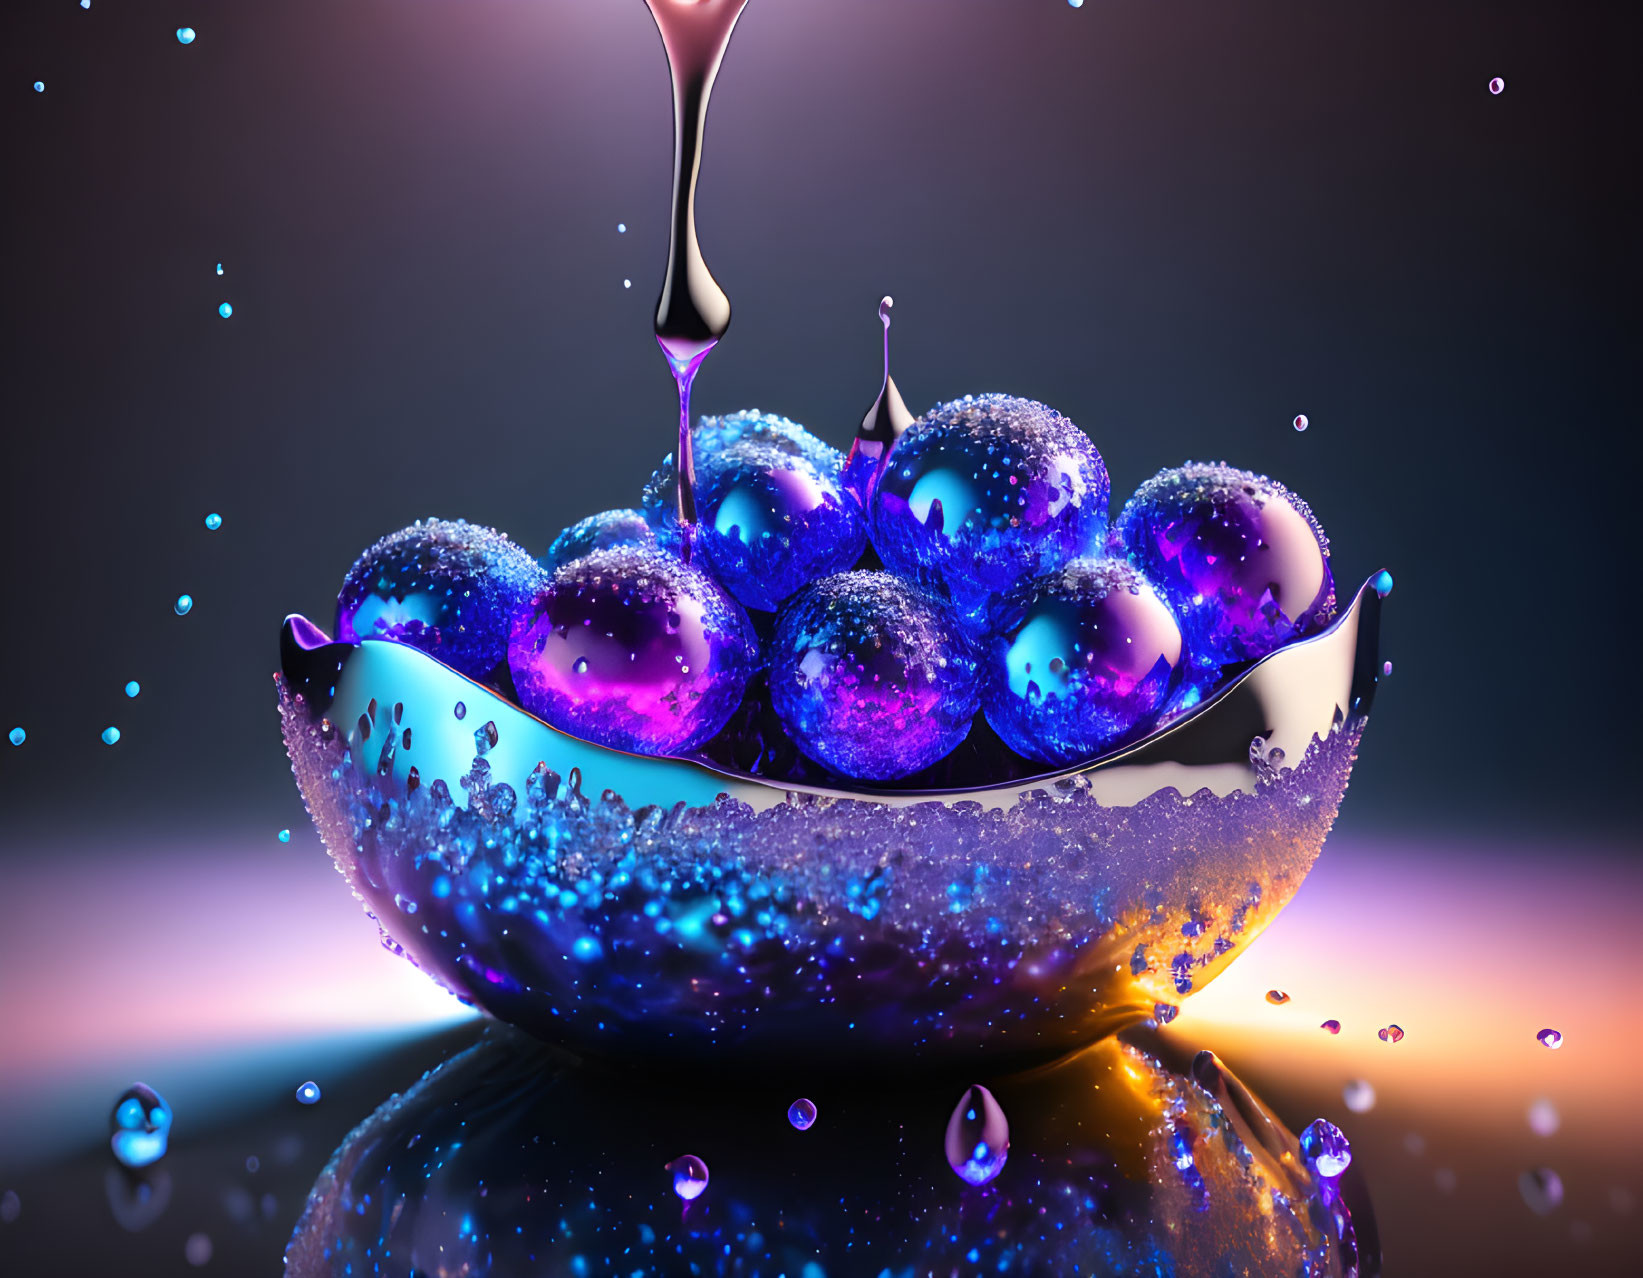 Chrome bowl with purple spheres and viscous liquid pouring over them